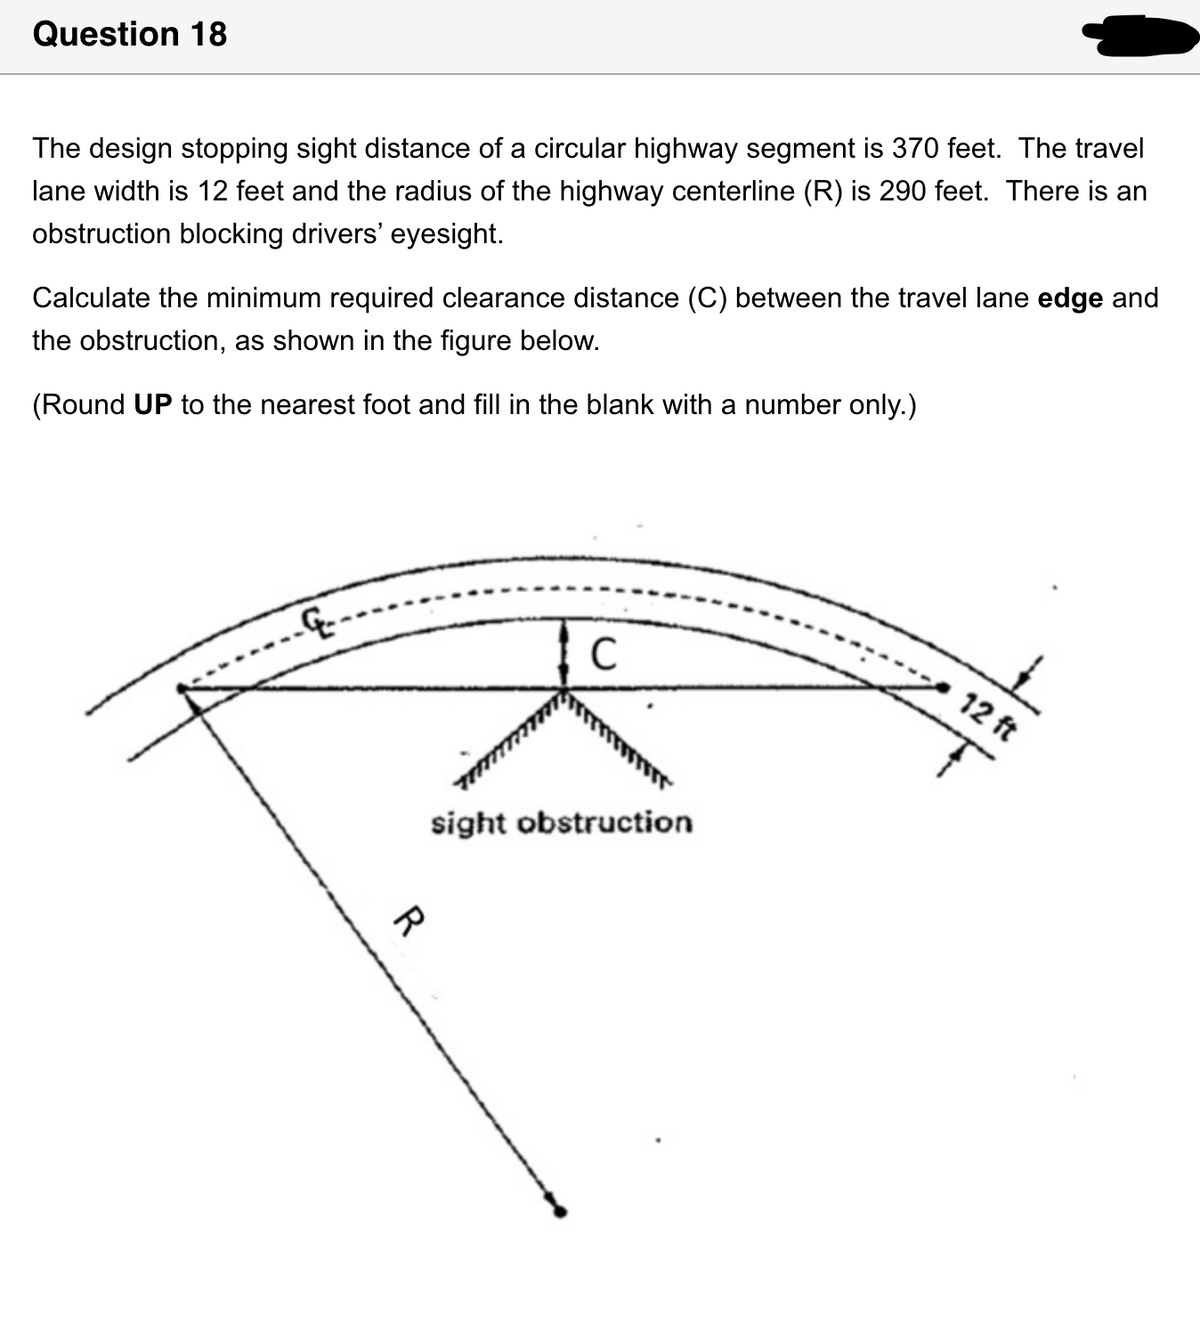 Question 18
The design stopping sight distance of a circular highway segment is 370 feet. The travel
lane width is 12 feet and the radius of the highway centerline (R) is 290 feet. There is an
obstruction blocking drivers' eyesight.
Calculate the minimum required clearance distance (C) between the travel lane edge and
the obstruction, as shown in the figure below.
(Round UP to the nearest foot and fill in the blank with a number only.)
-----..
C
sight obstruction
R
12 ft